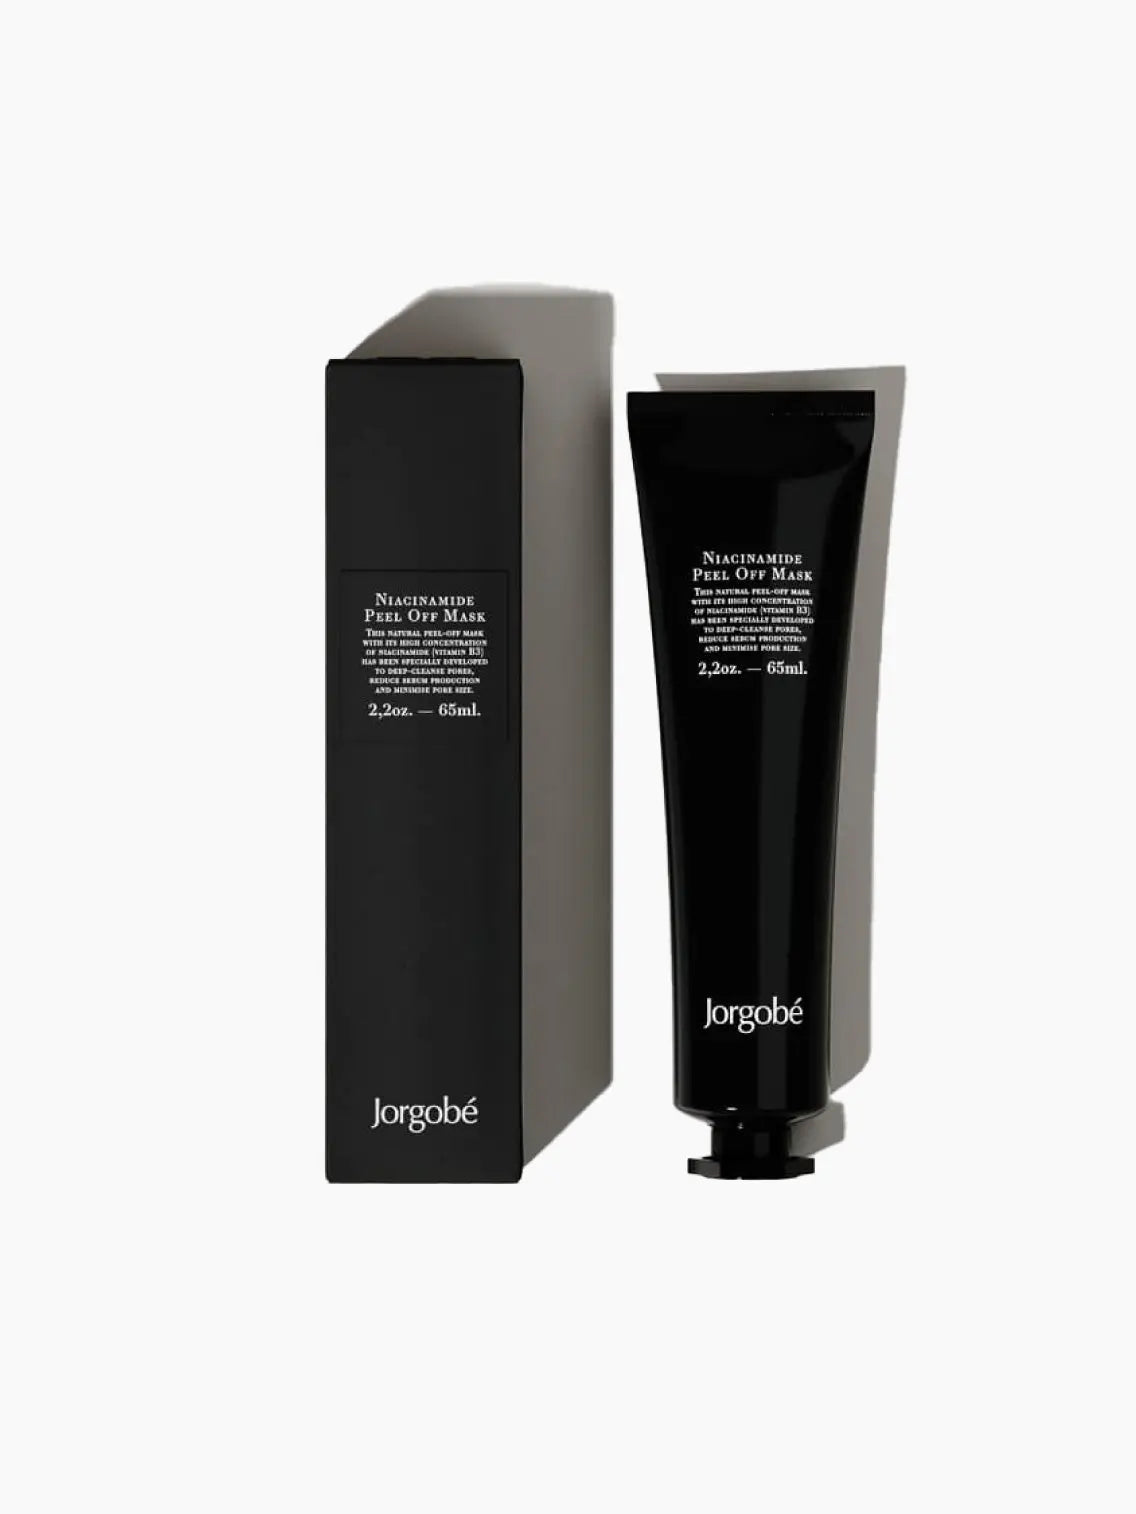 A sleek, black tube of Jorgobé Niacinamide Peel Off Mask 65ml stands next to its matching black box. Both the tube and the box are labeled with white text detailing the product's name and specifications: 2.20 oz (65 ml). Now available at Bassalstore in Barcelona.